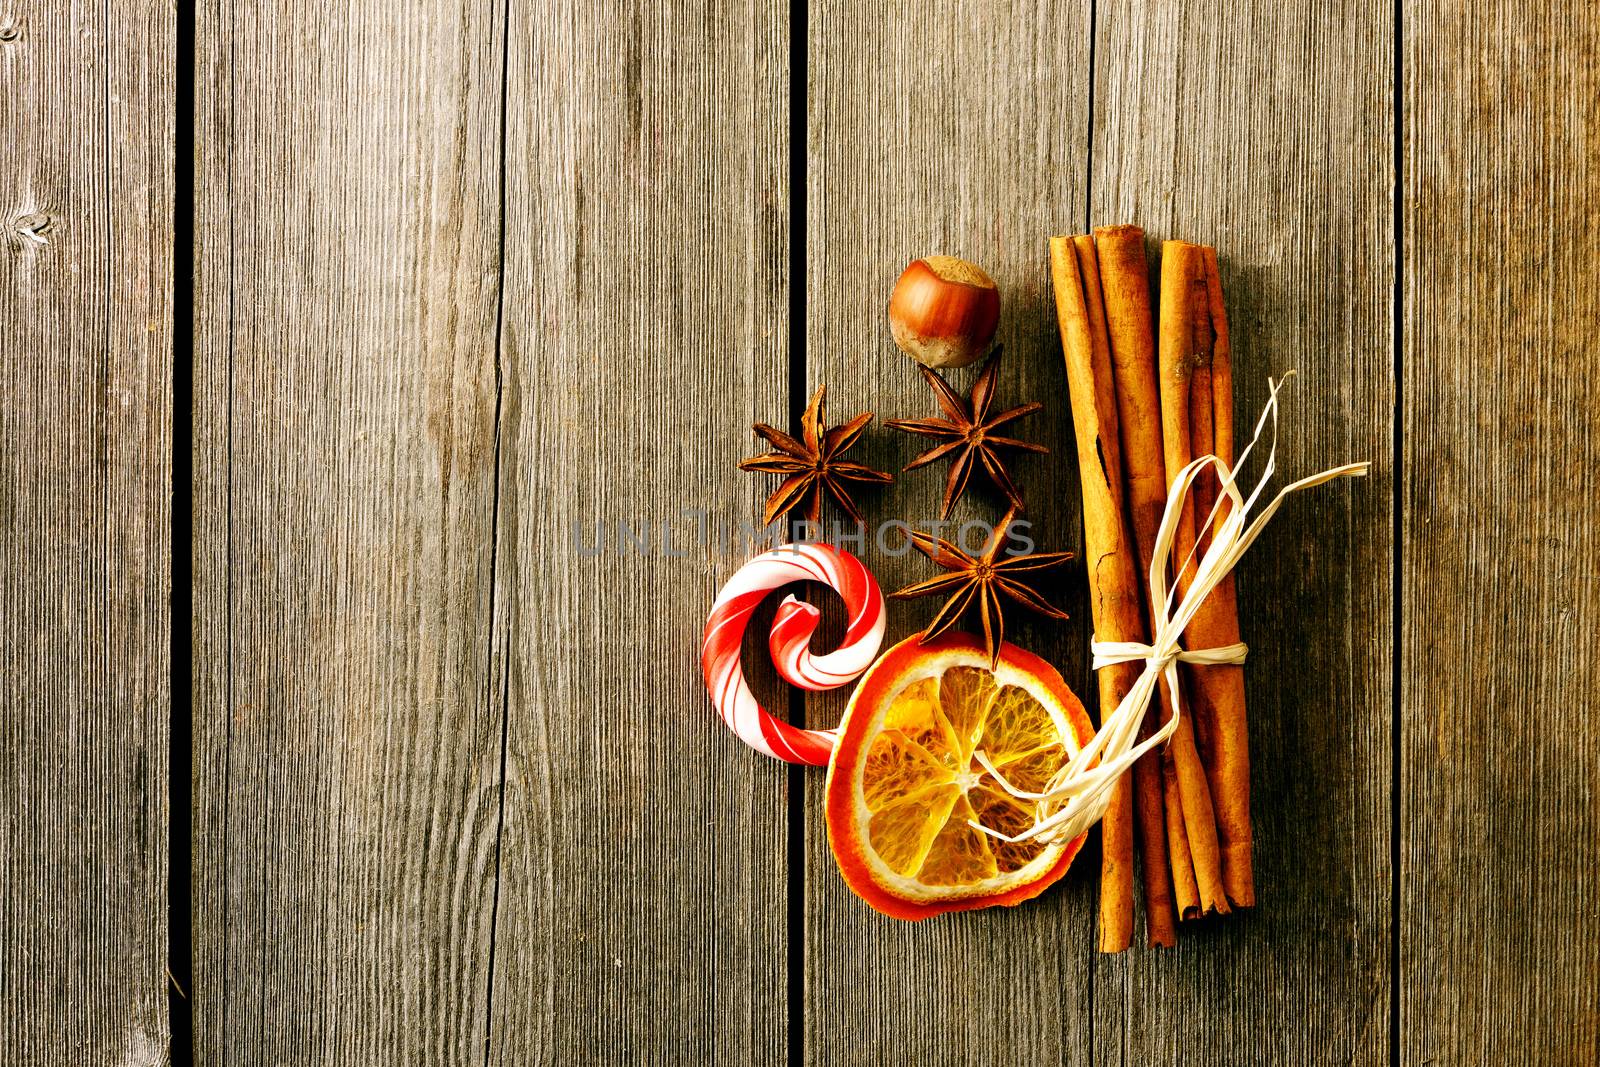 Cinnamon sticks over wooden table by haveseen